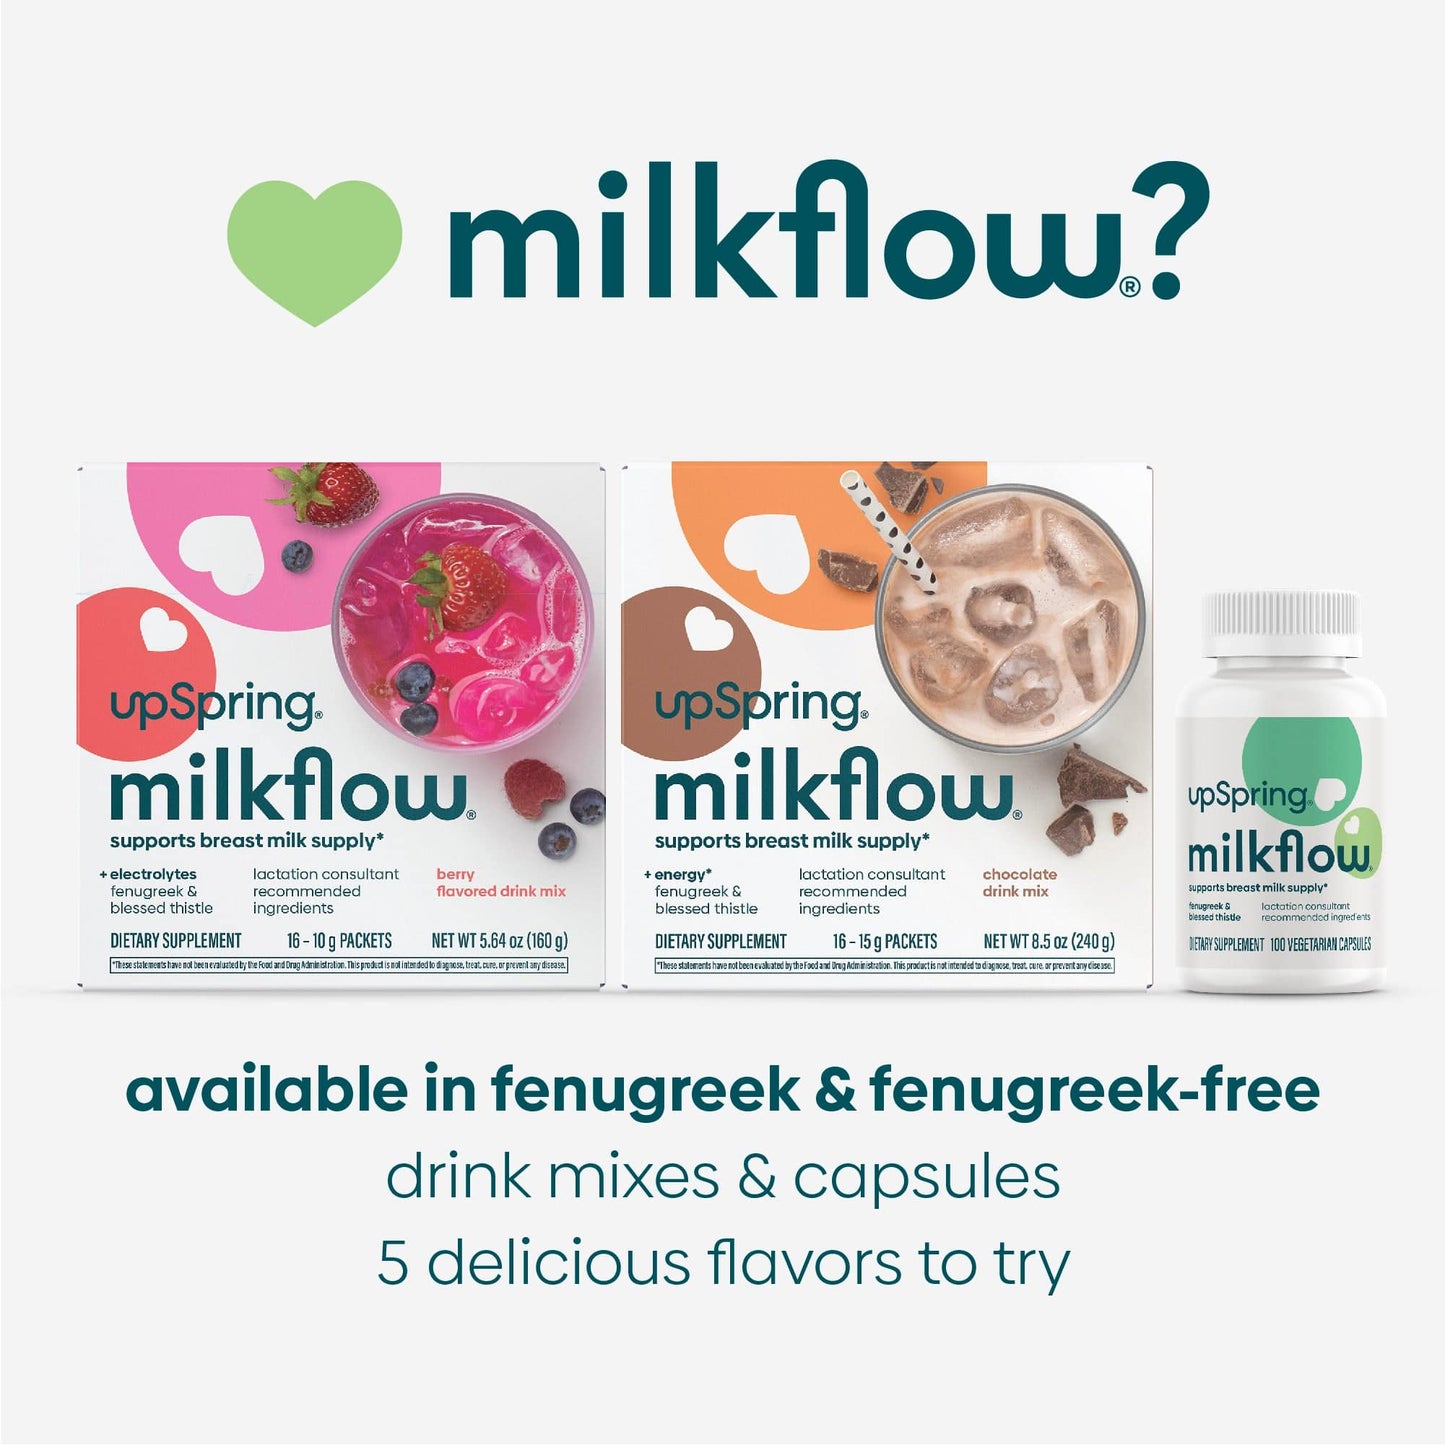 MilkFlow is available in multiple varieties, flavors, and types